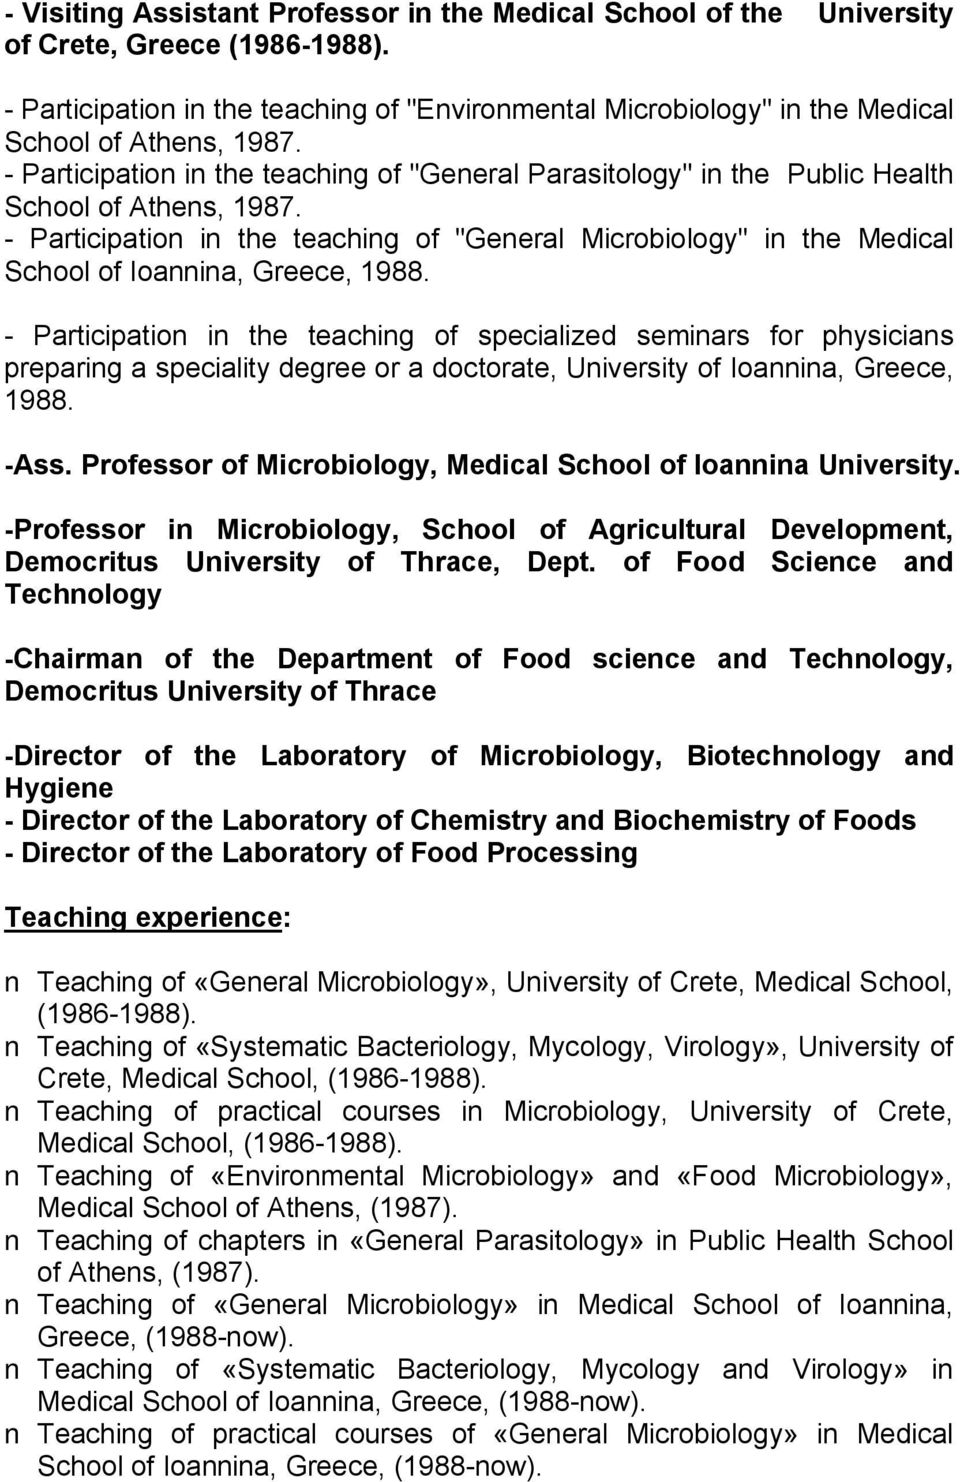 - Participation in the teaching of "General Parasitology" in the Public Health School of Athens, 1987.